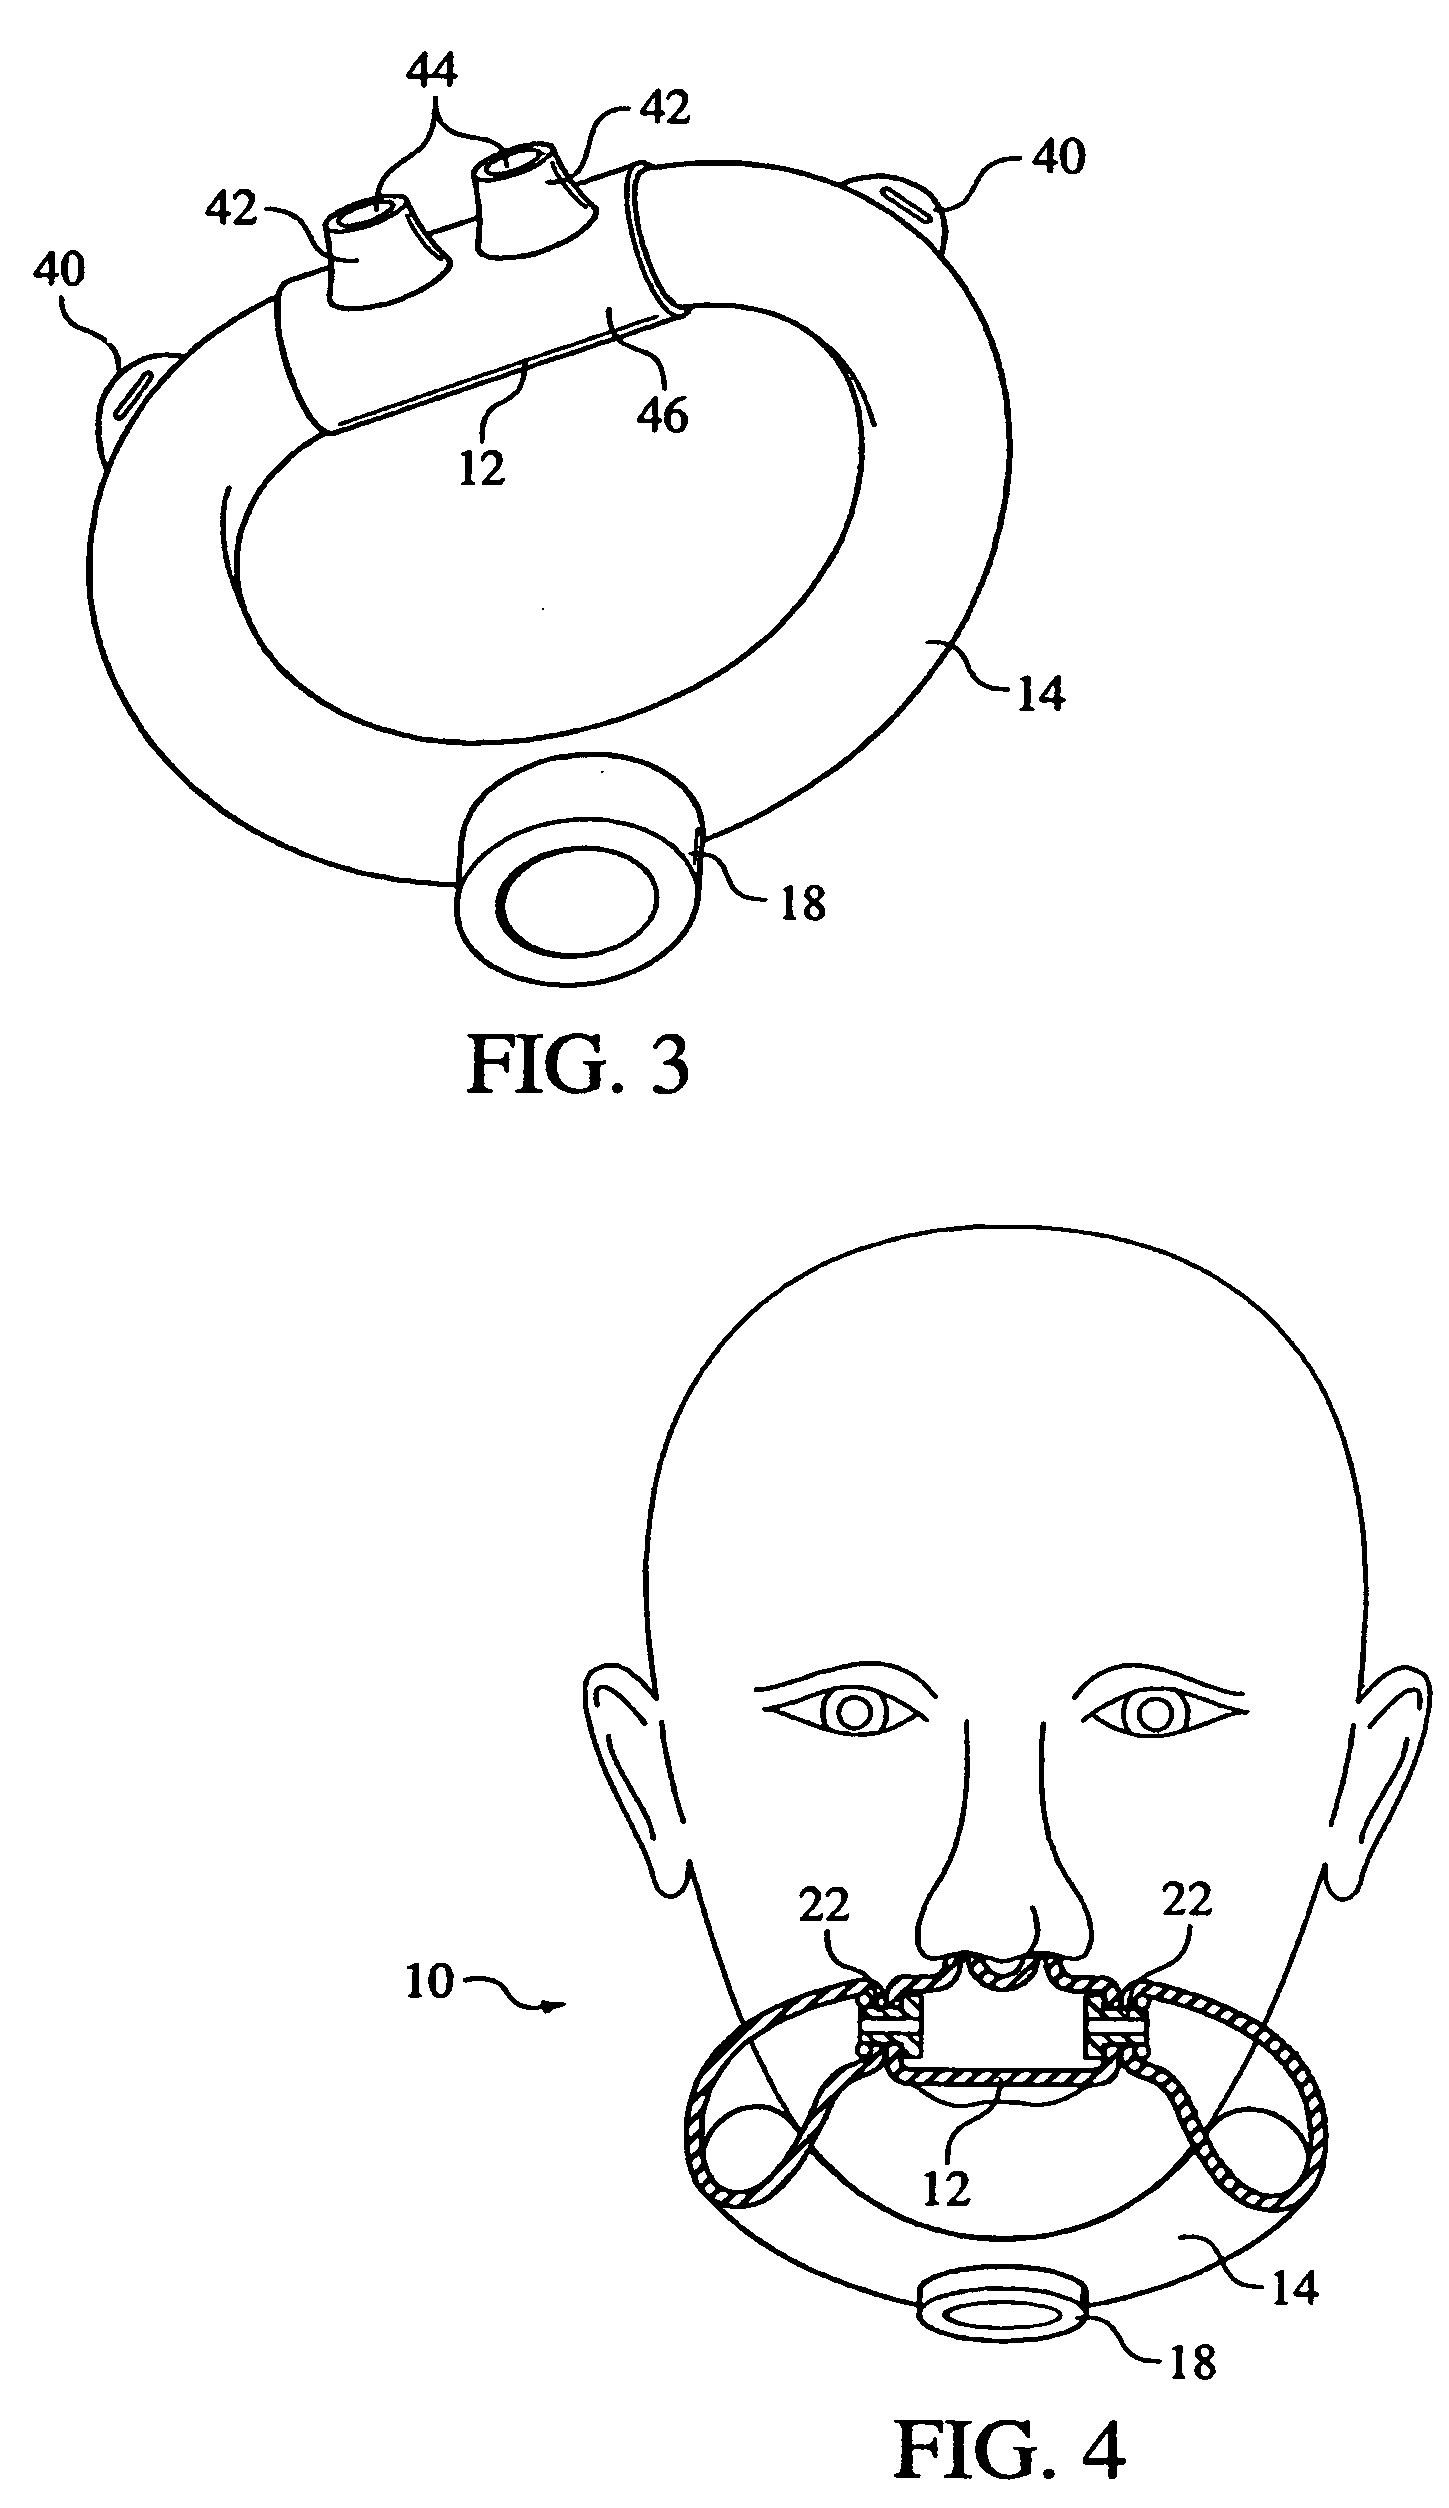 Patient interface assembly supported under the mandible